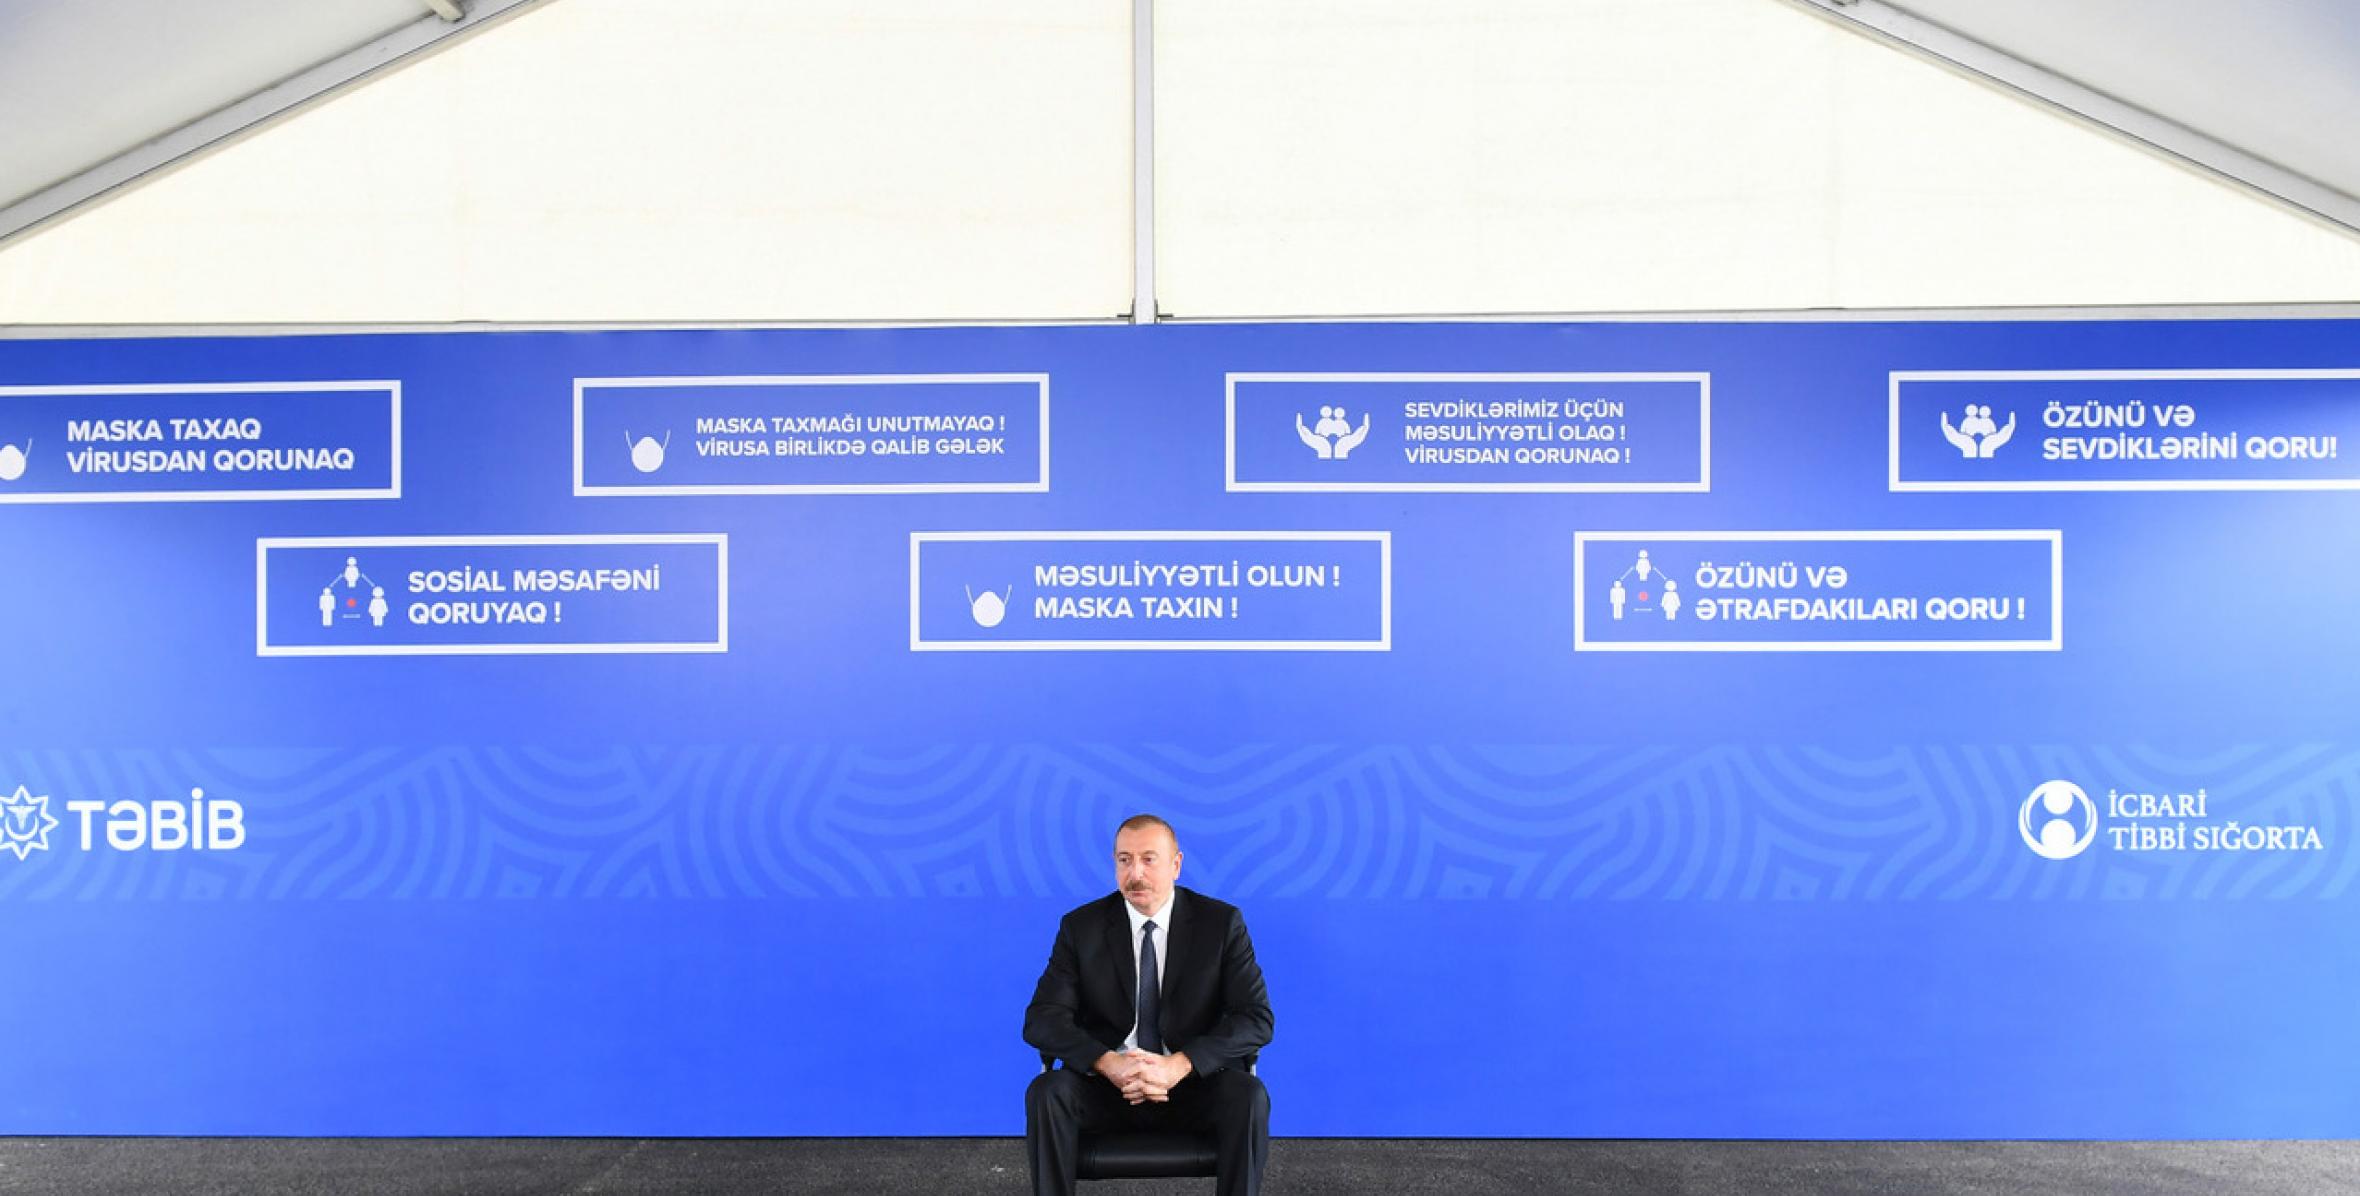 Speech by Ilham Aliyev at the opening of modular hospital in Shaki